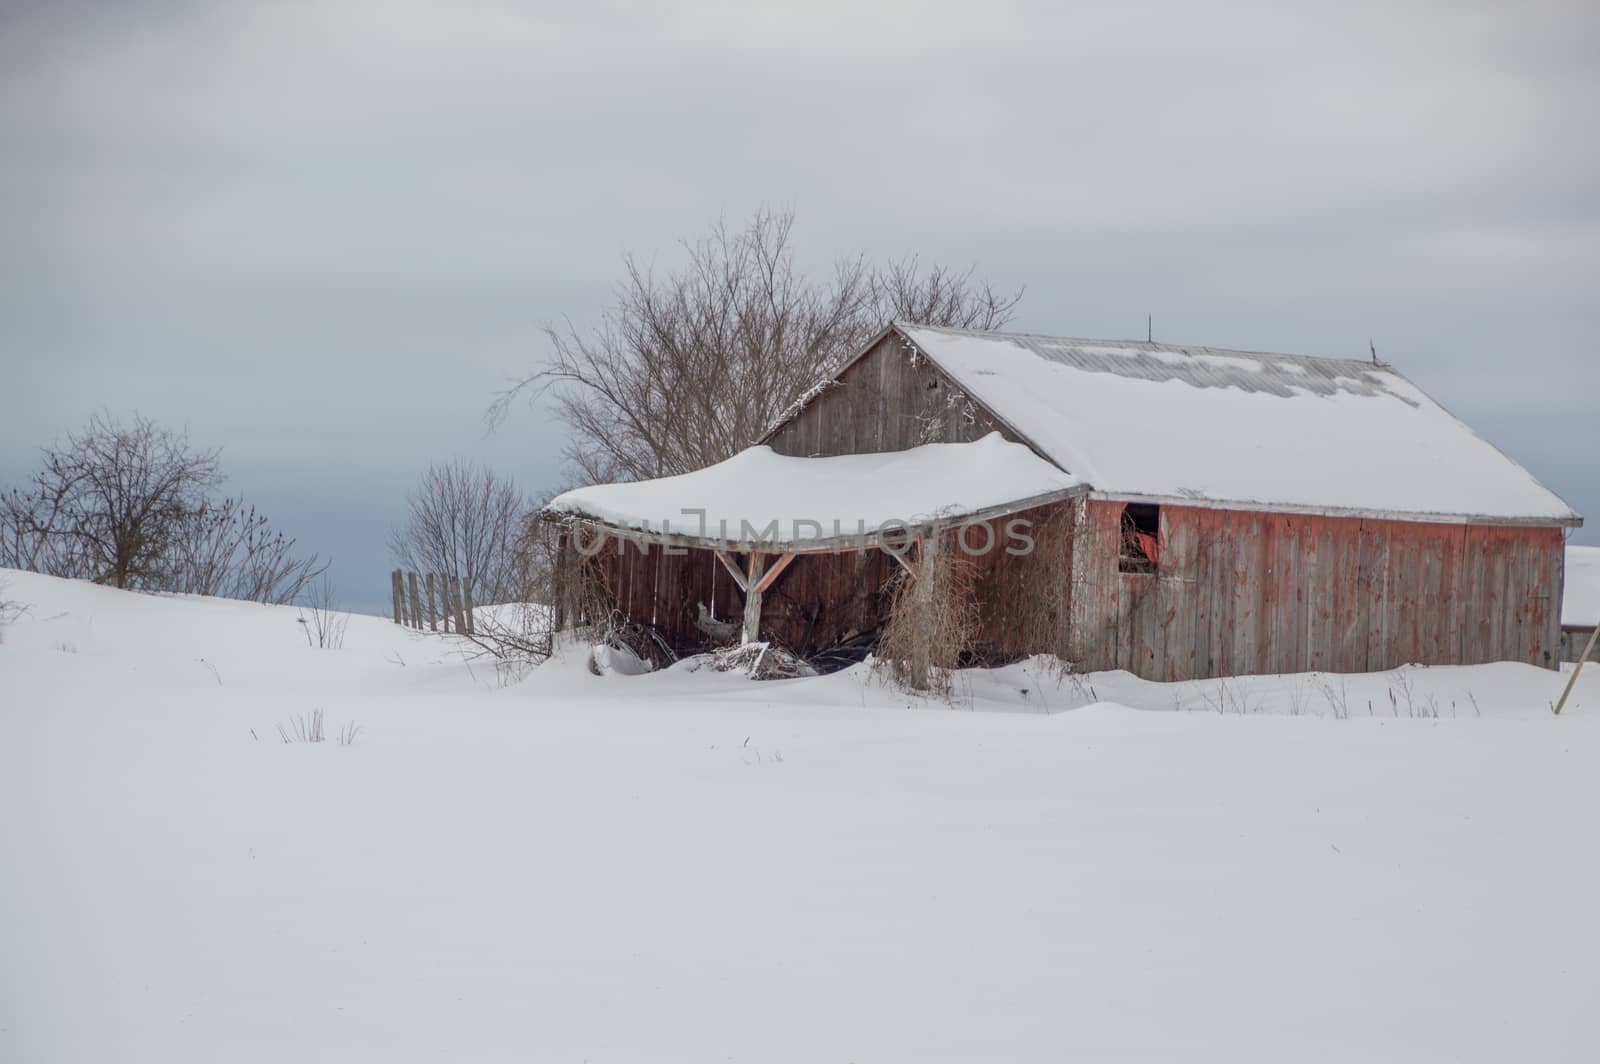 Snowy old  barn on a grey day. Barnboards are faded red, old and weathered. Shows some trees and snow, with copy space.